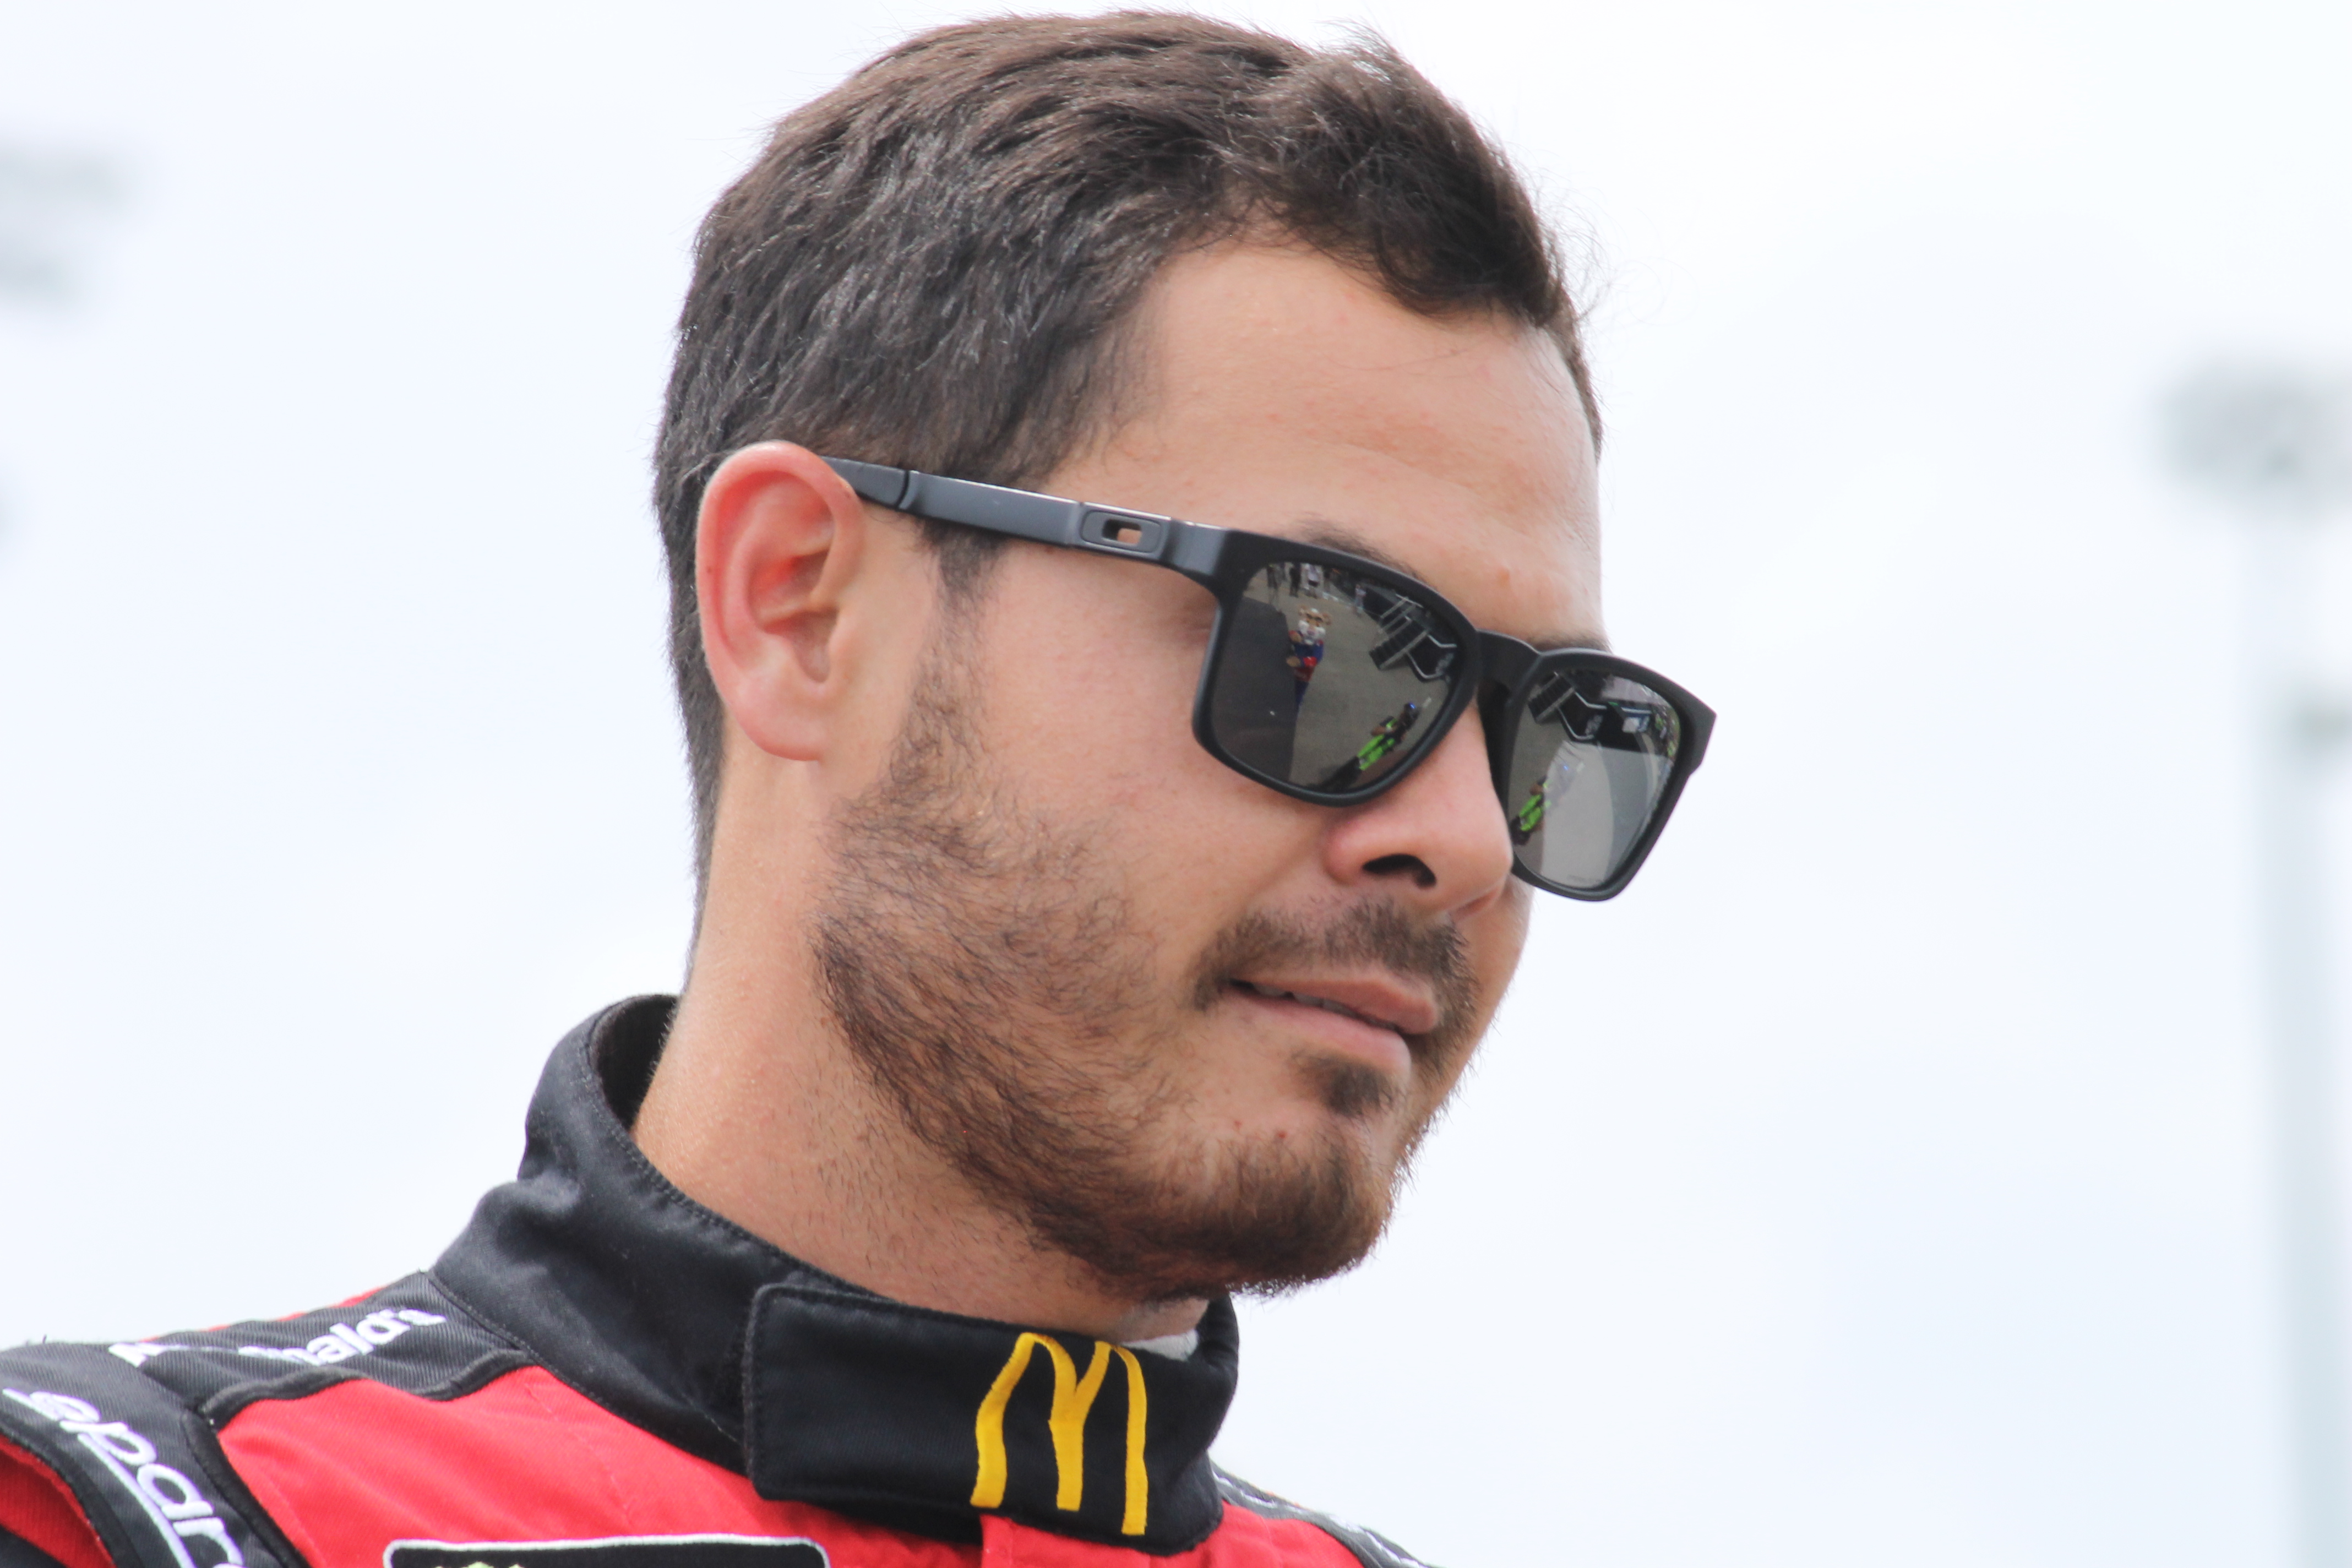 All in all, Kyle Larson remains optimistic about his team's Playoffs push. (Photo Credit: Matteo Marcheschi/TPF)